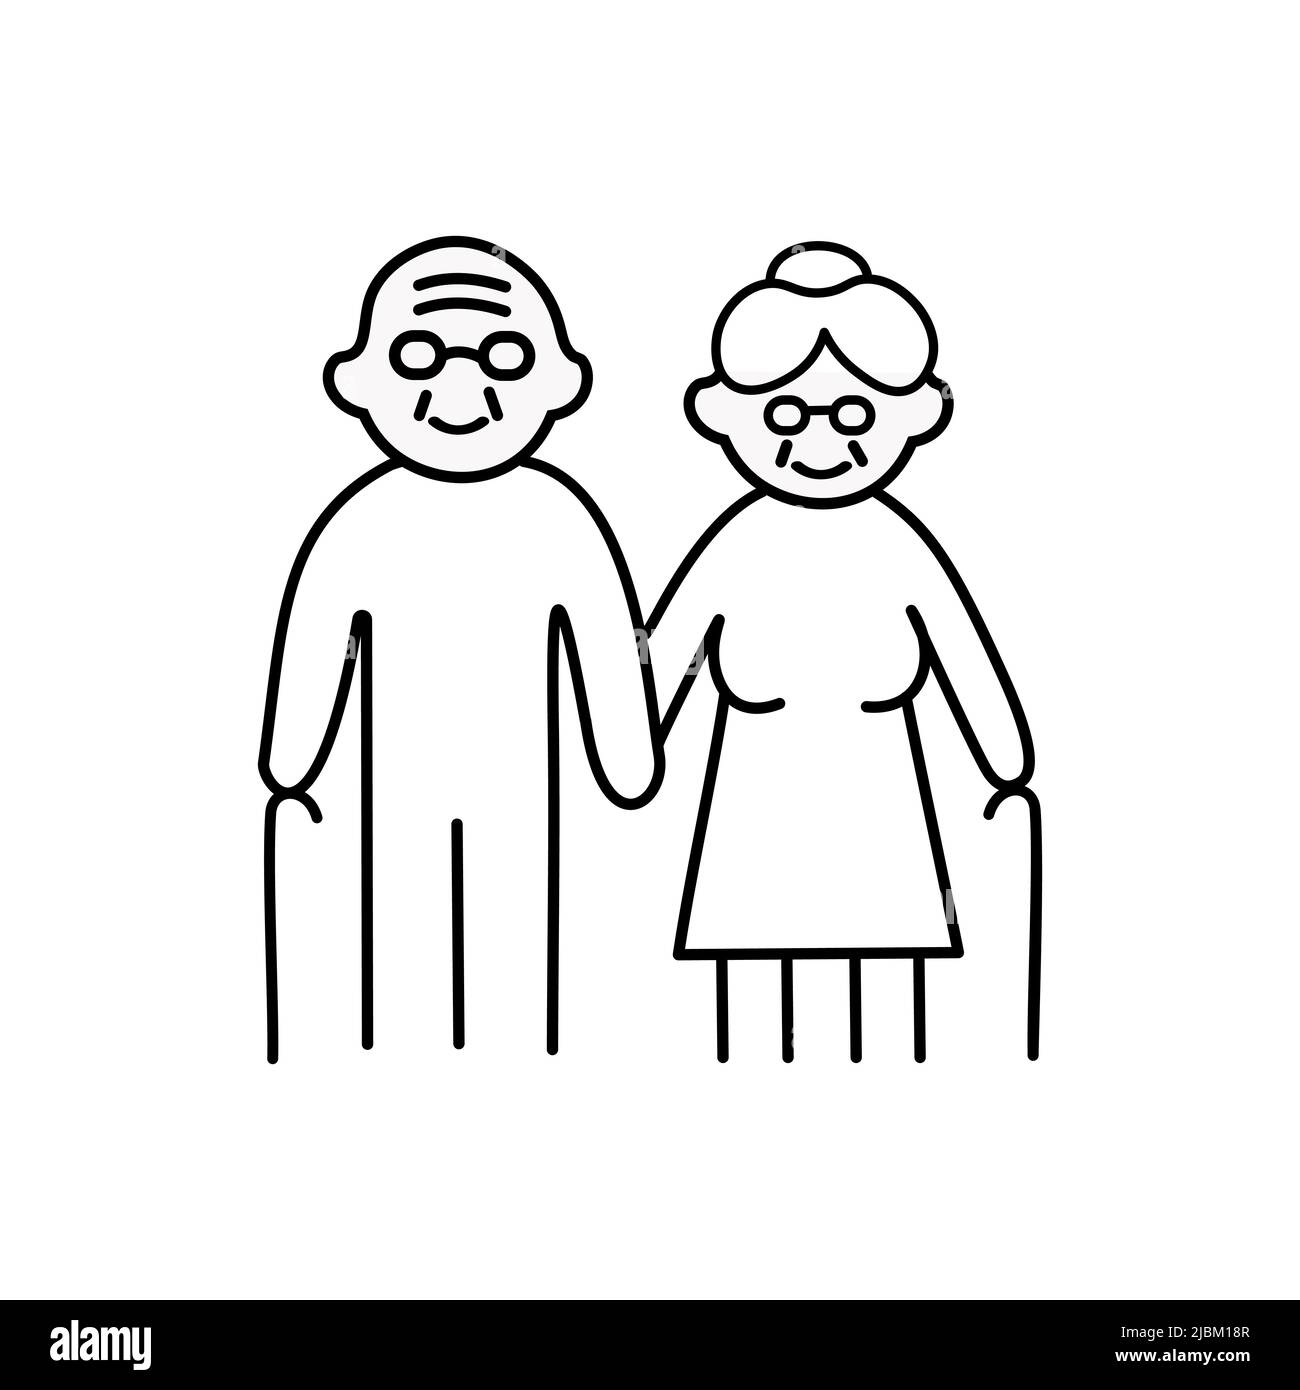 Grandparents hand drawn outline doodle icon. Happy family together - grandfather, grandmother holding hands Stock Vector